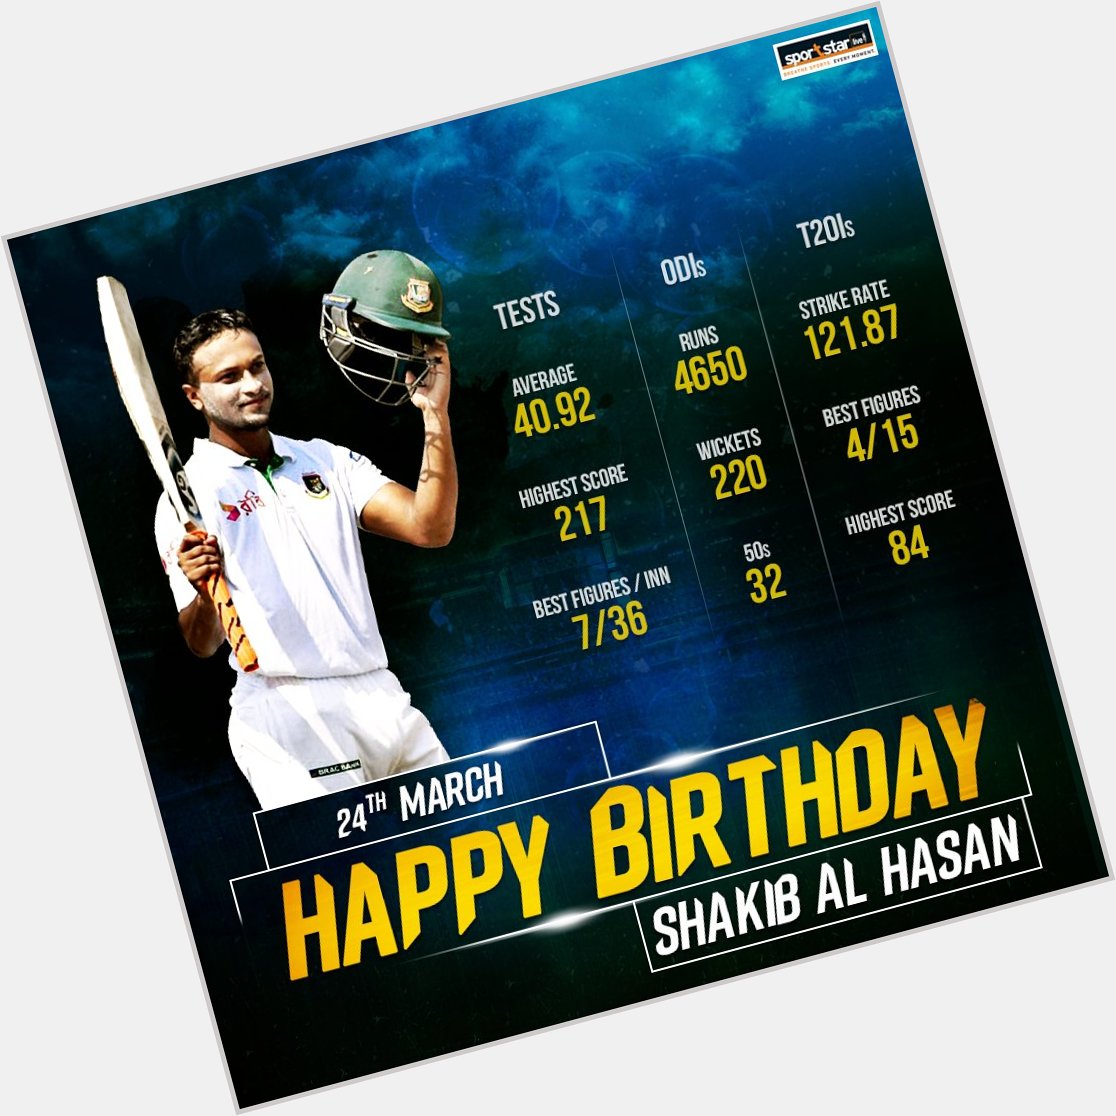 We wish a very happy birthday to one of the genuine all-rounders to have graced cricket, Shakib Al Hasan. 